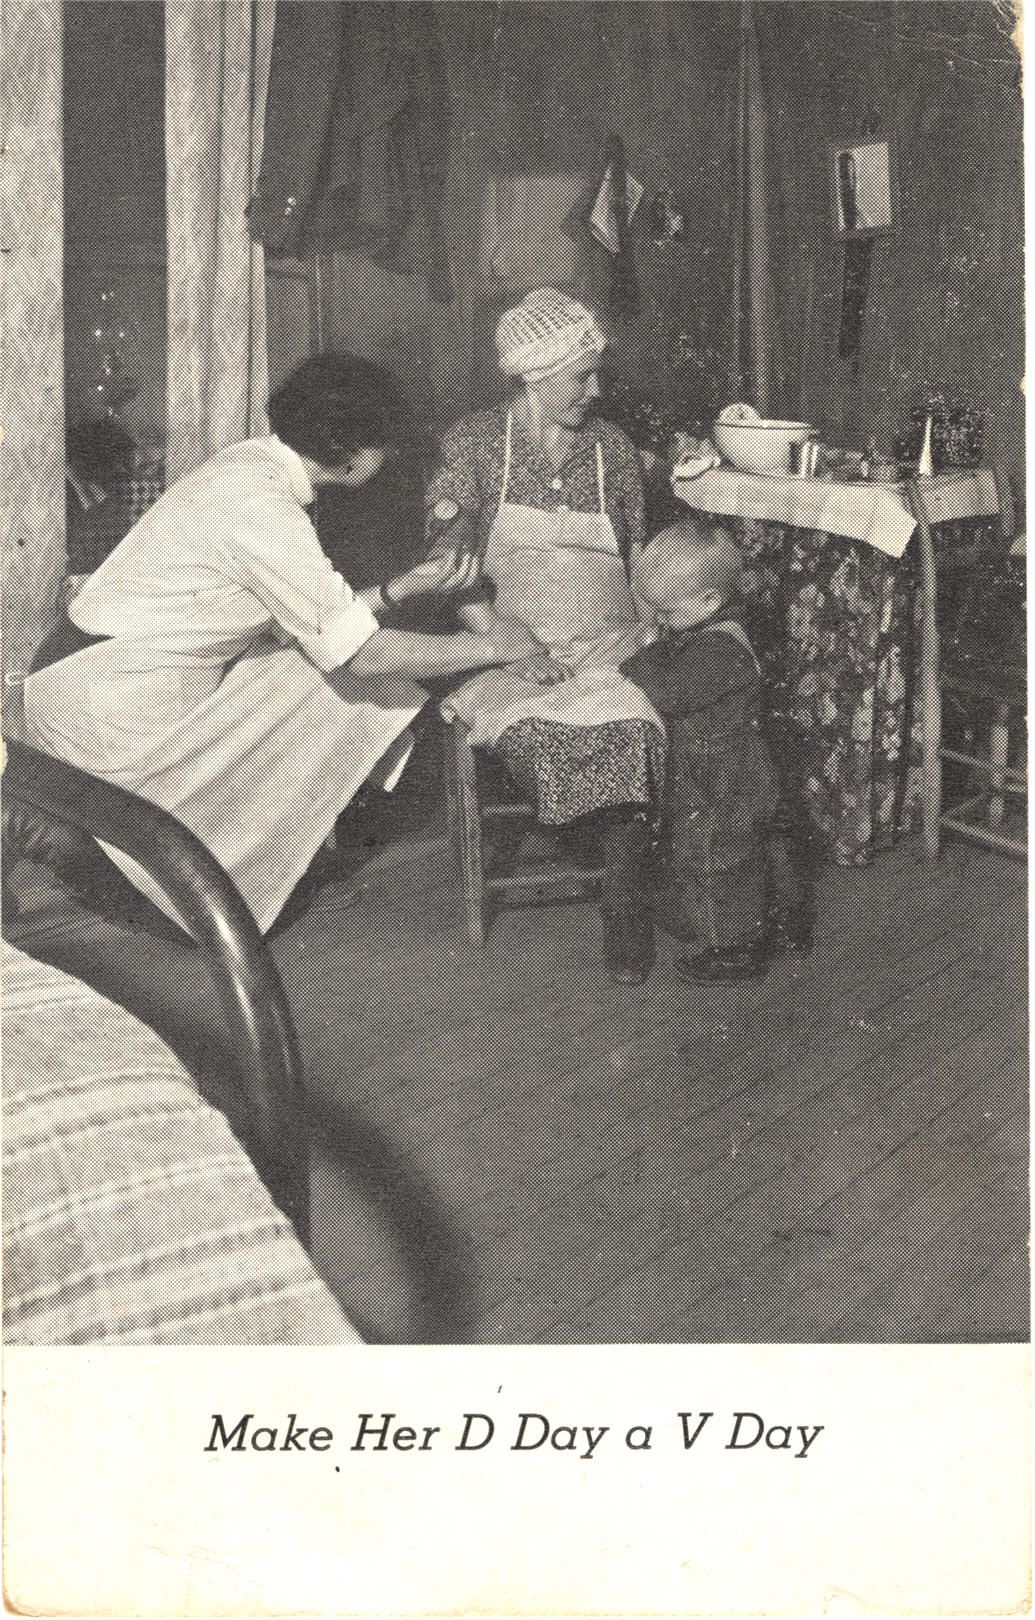 A White female nurse in white squats down while talking with a White mother and child.